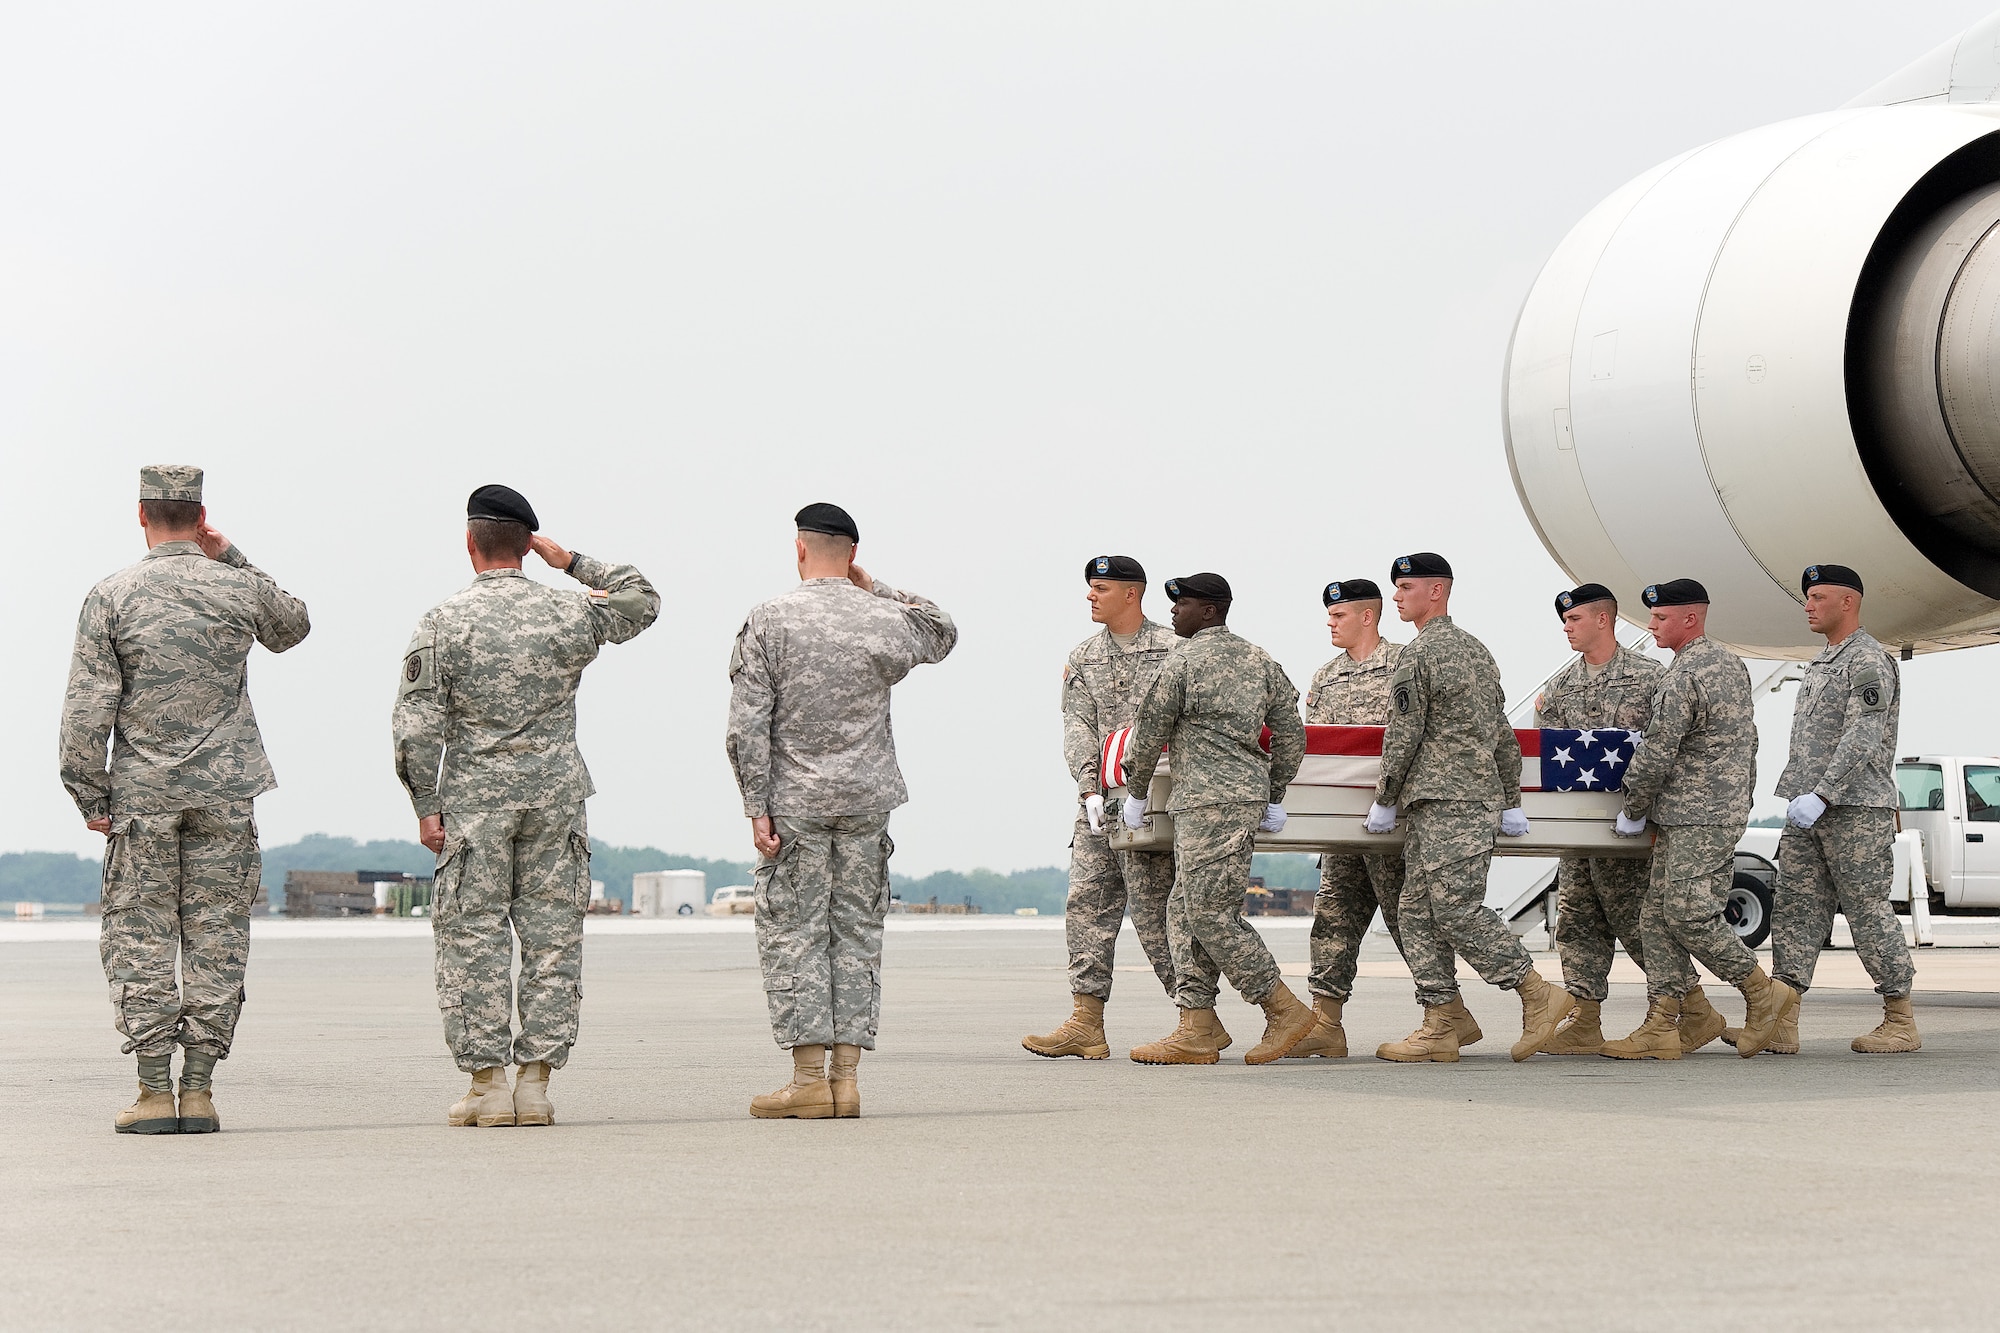 A U.S. Army carry team transfers the remains of Army Lt. Col. Todd J. Clark of Evans Mills, N.Y., at Dover Air Force Base, Del., on June 12, 2013. Clark was assigned to the Headquarters and Headquarters Company, 2nd Brigade Combat Team, 10th Mountain Division, Fort Drum, N.Y. (U.S. Air Force photo/Roland Balik)